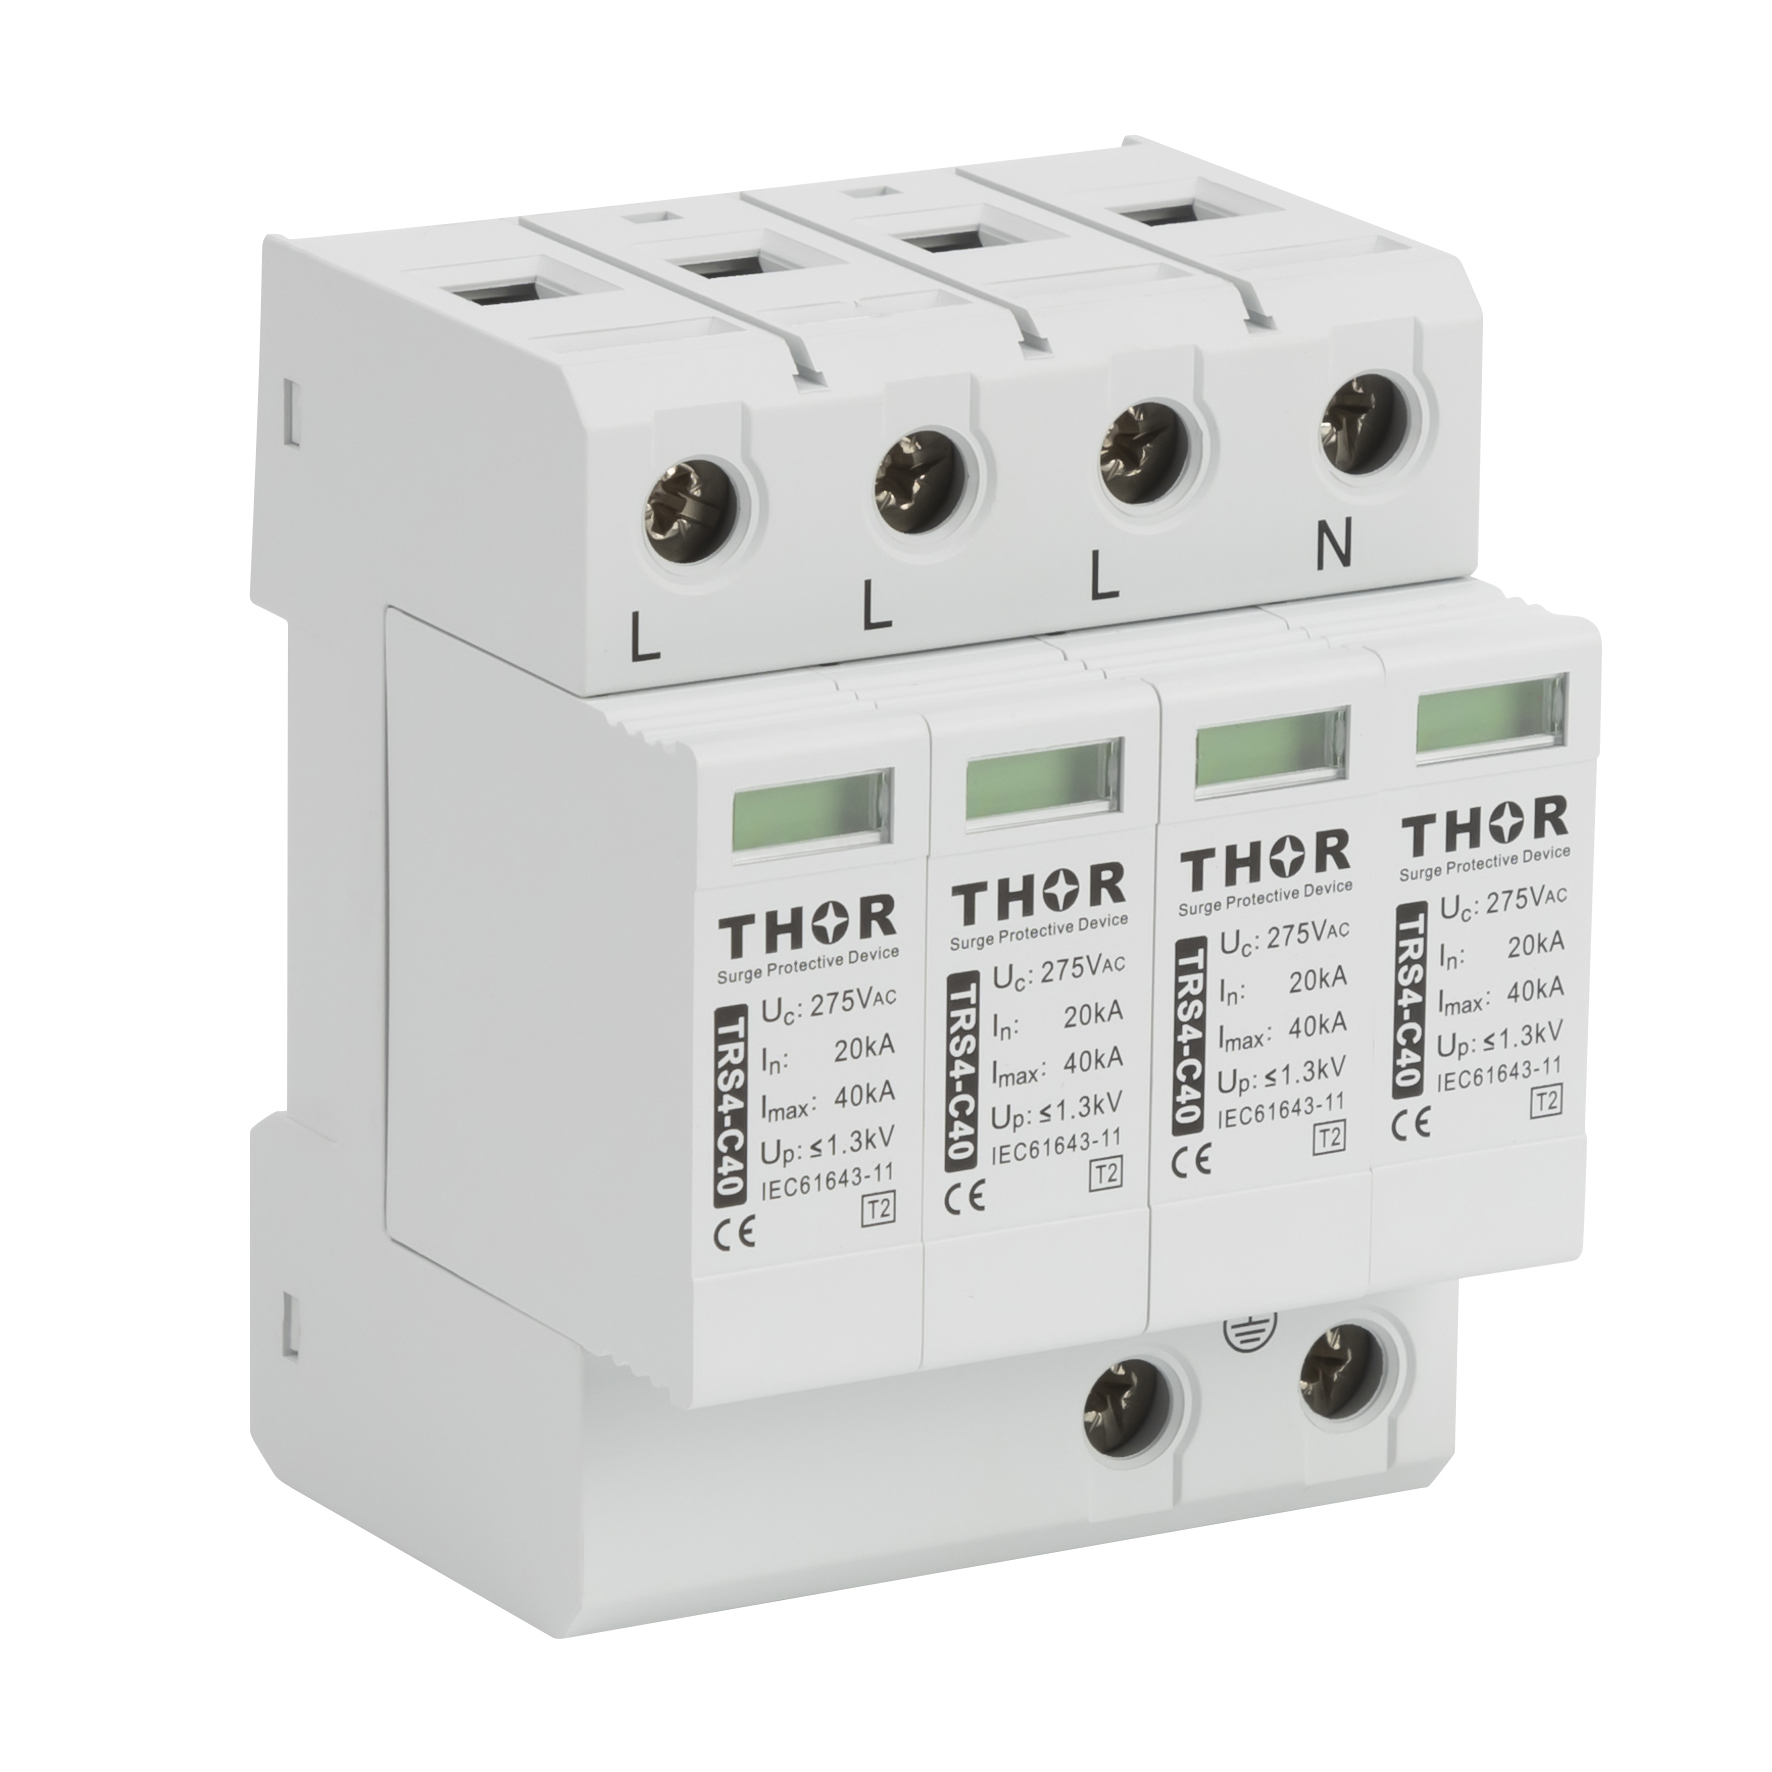 Type 2 AC surge protection device TRS4 series